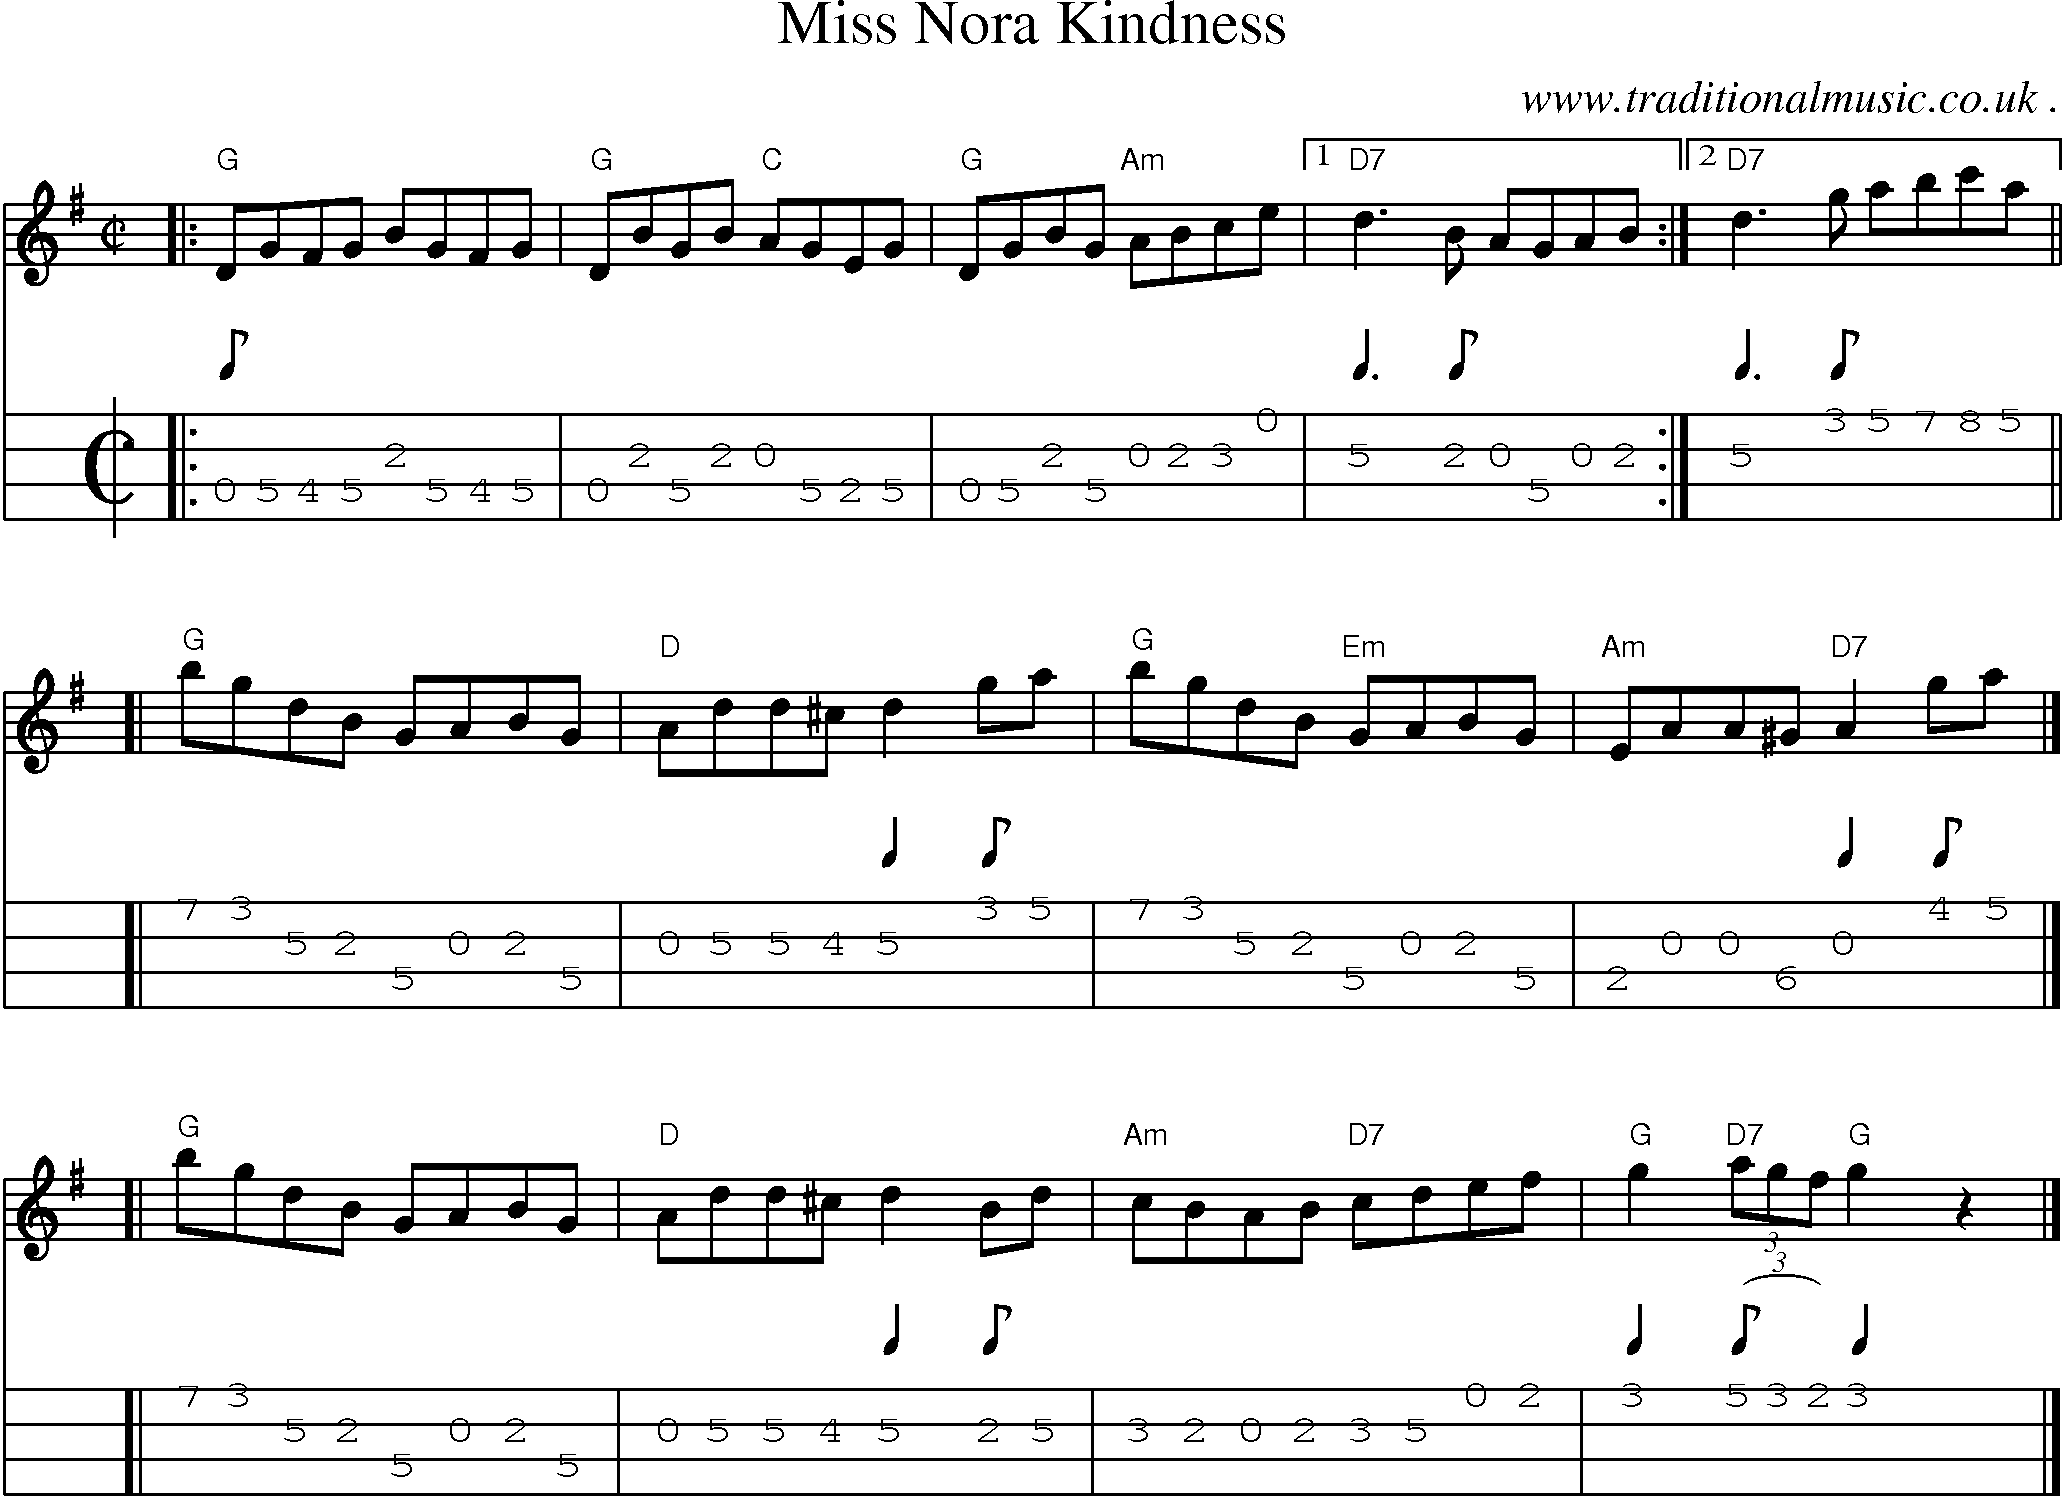 Sheet-music  score, Chords and Mandolin Tabs for Miss Nora Kindness